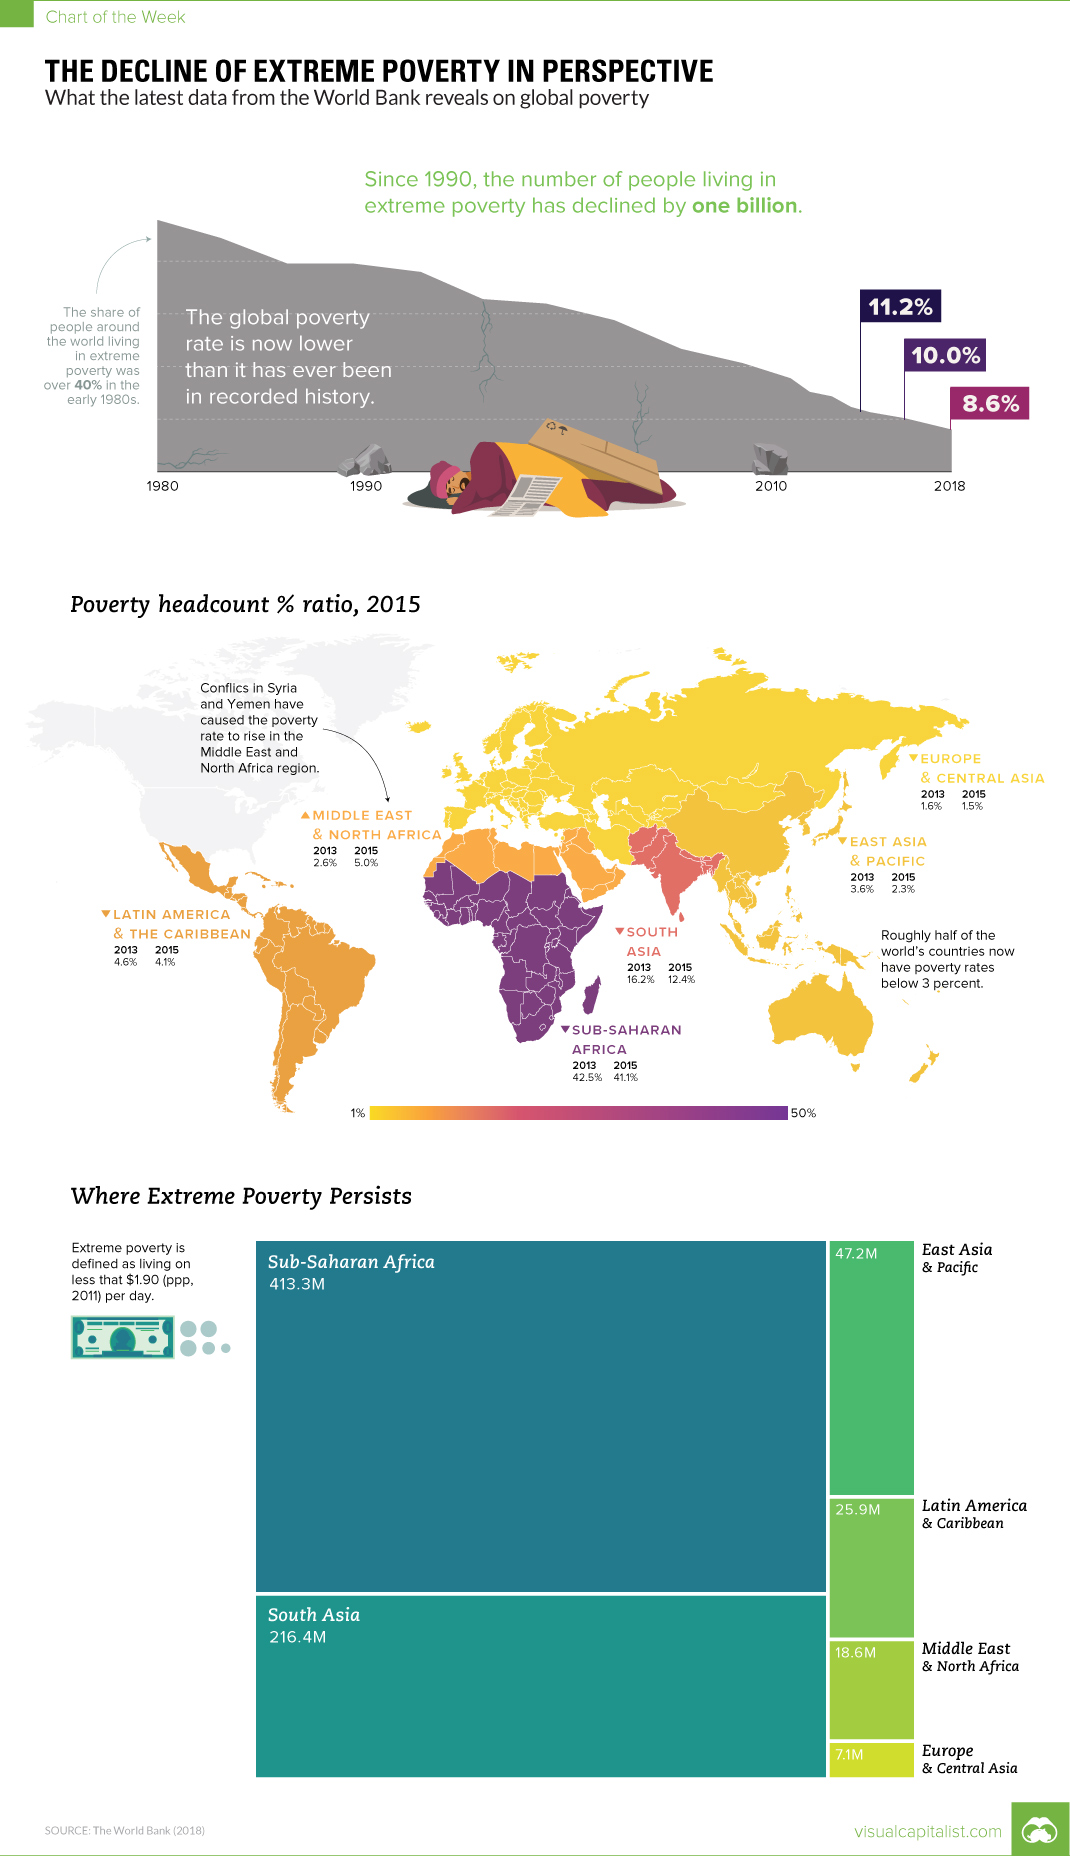 The Decline of Extreme Poverty in Perspective